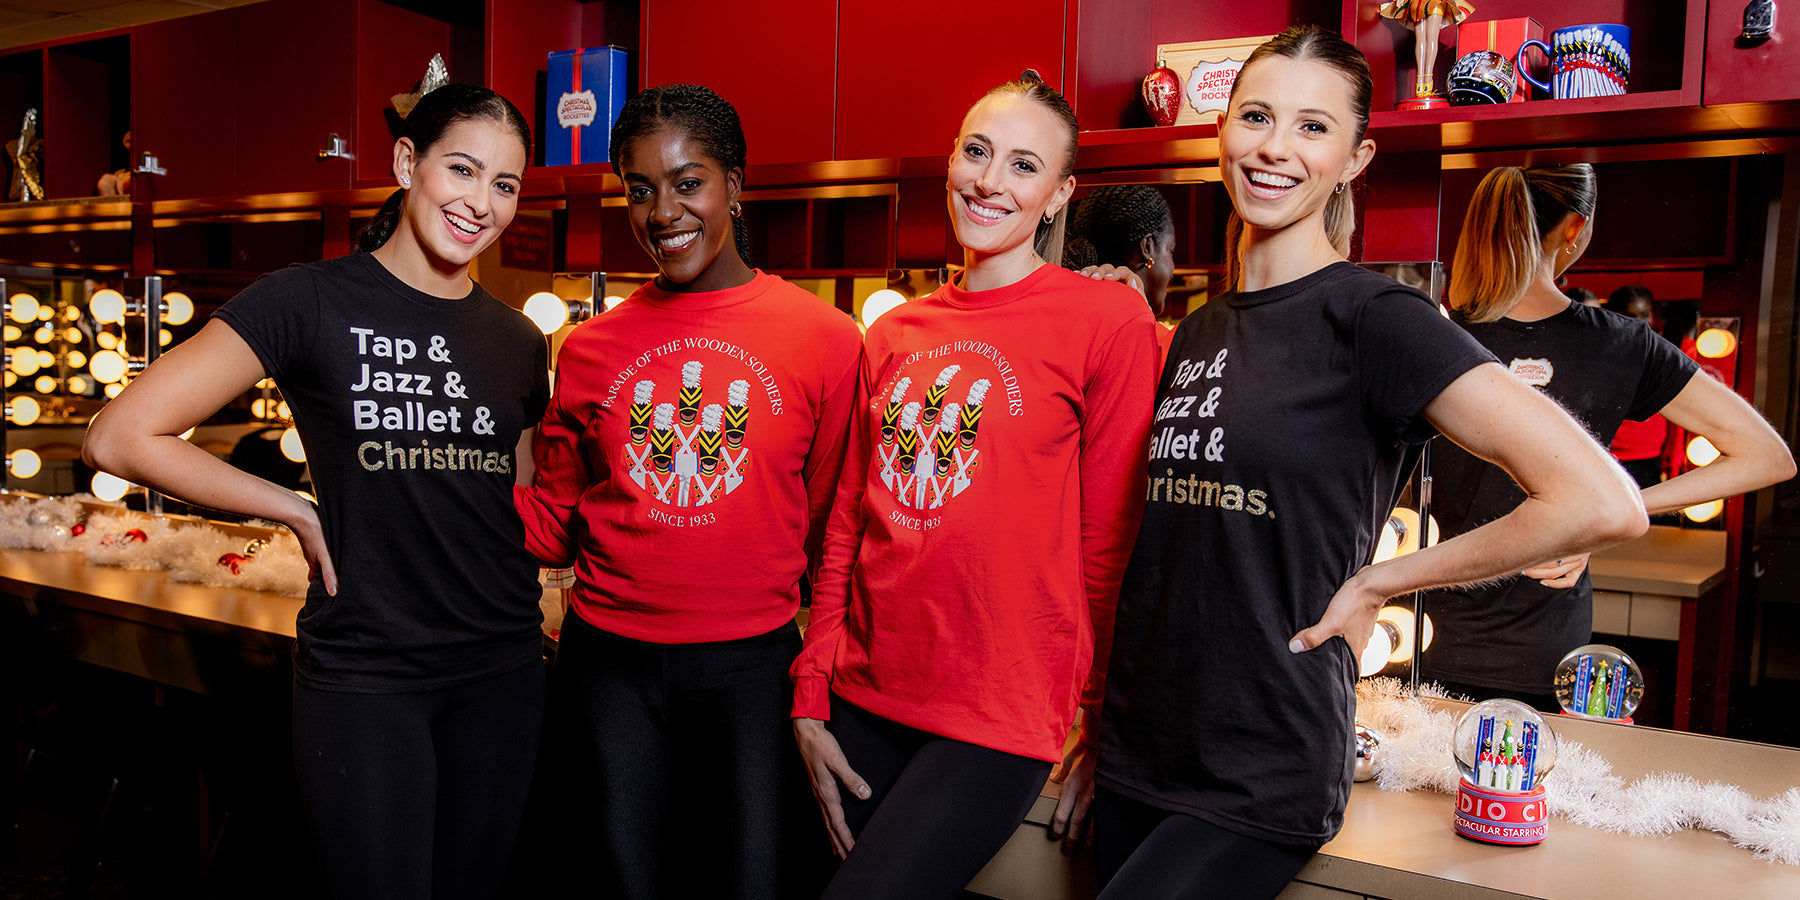 Four women wearing official merchandise from the Radio City Rockettes Christmas Spectacular performance